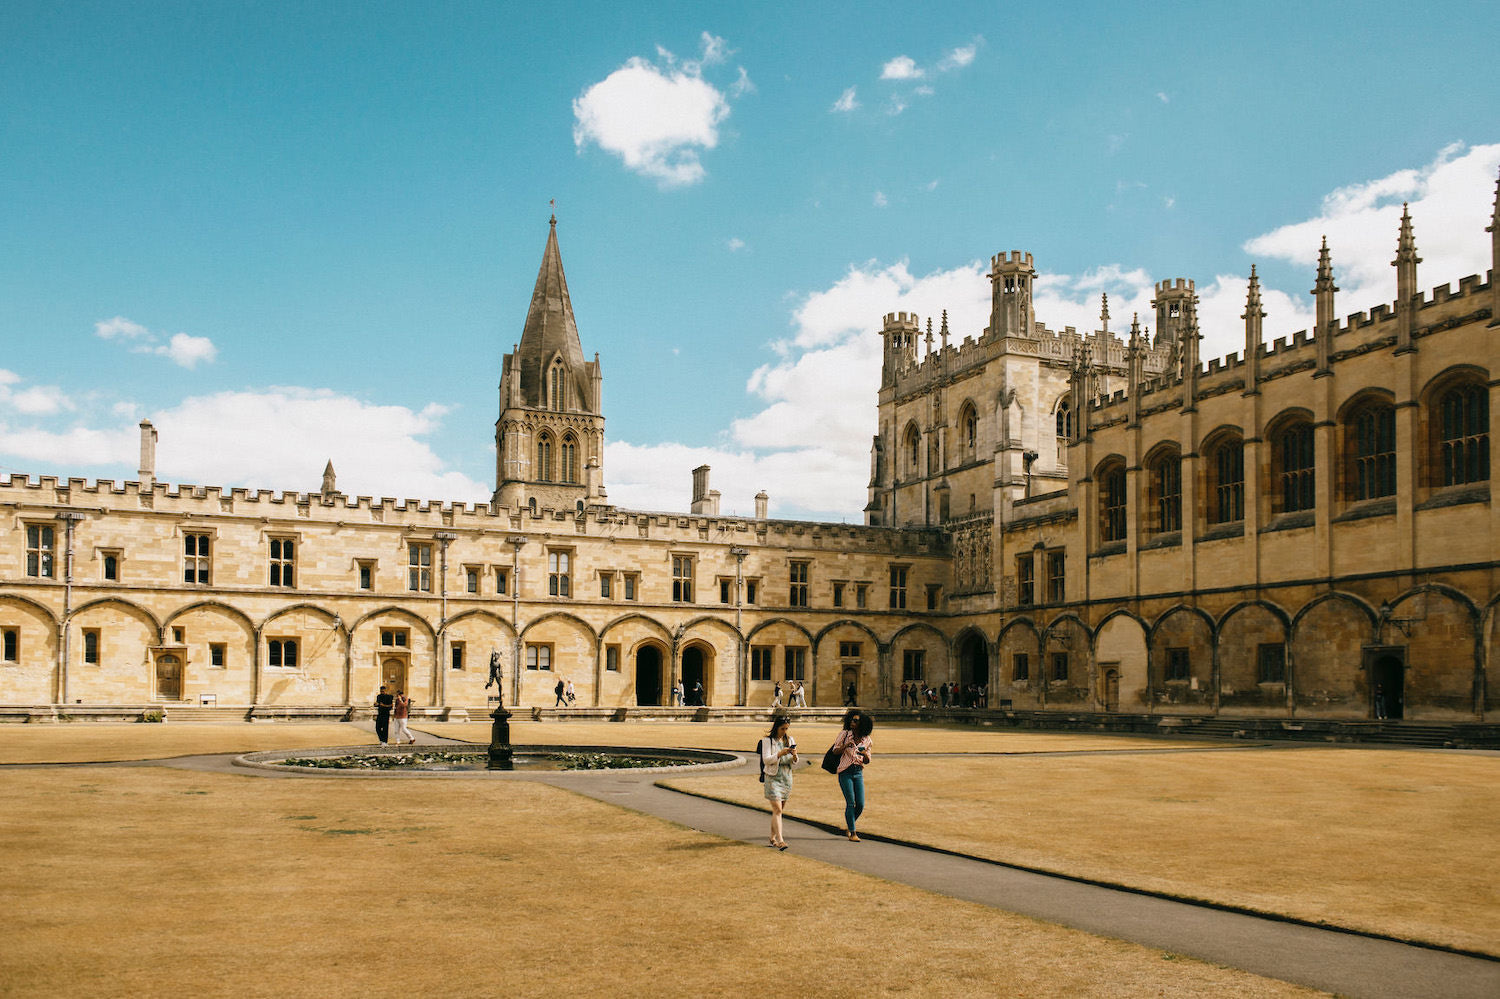 Students walking through an Oxford college quad, where Missing Bean wholesale coffee is served